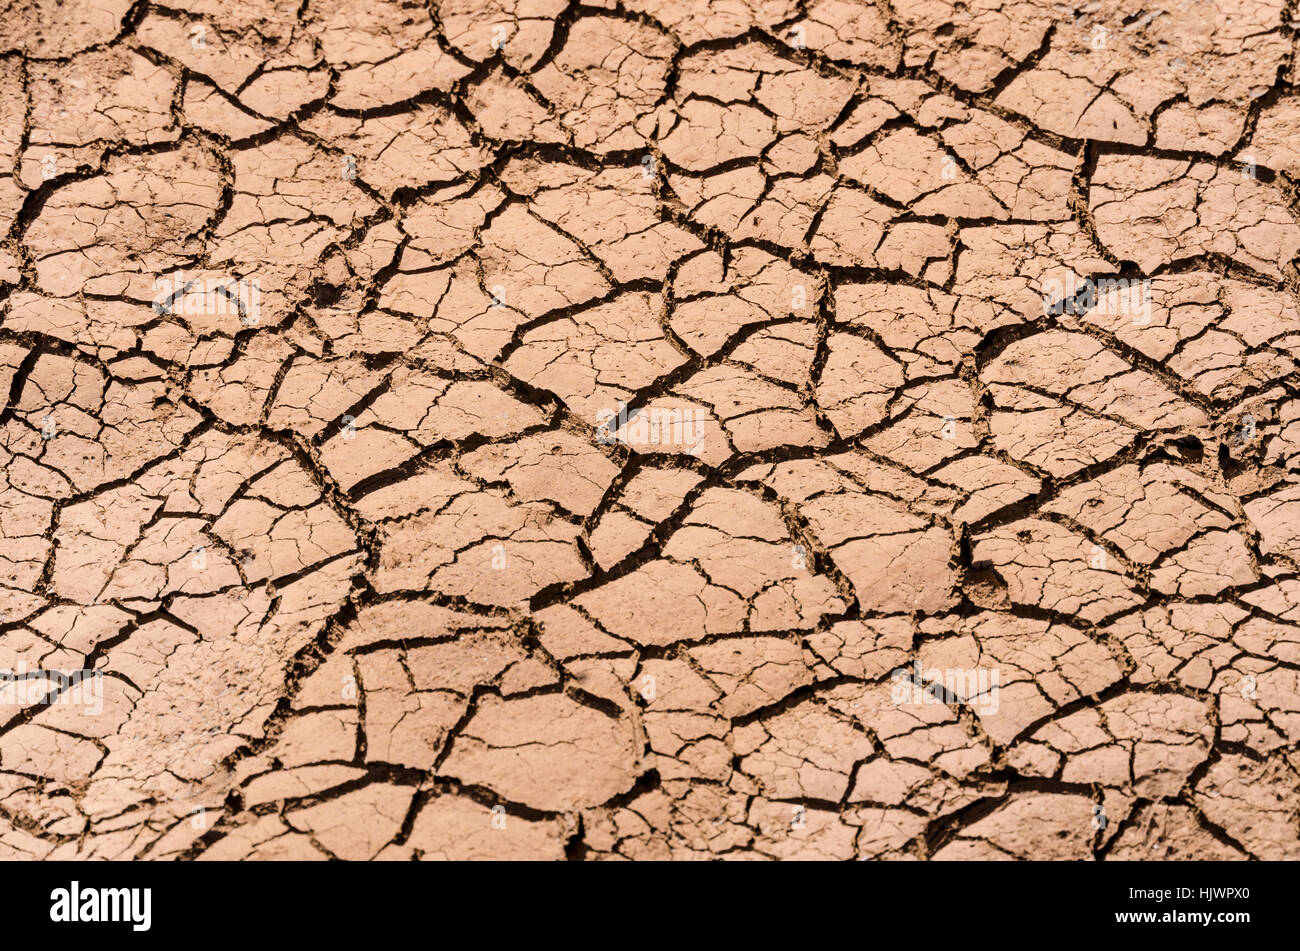 ground, soil, earth, humus, drought, dried, land, fissured, cracked, realty, Stock Photo